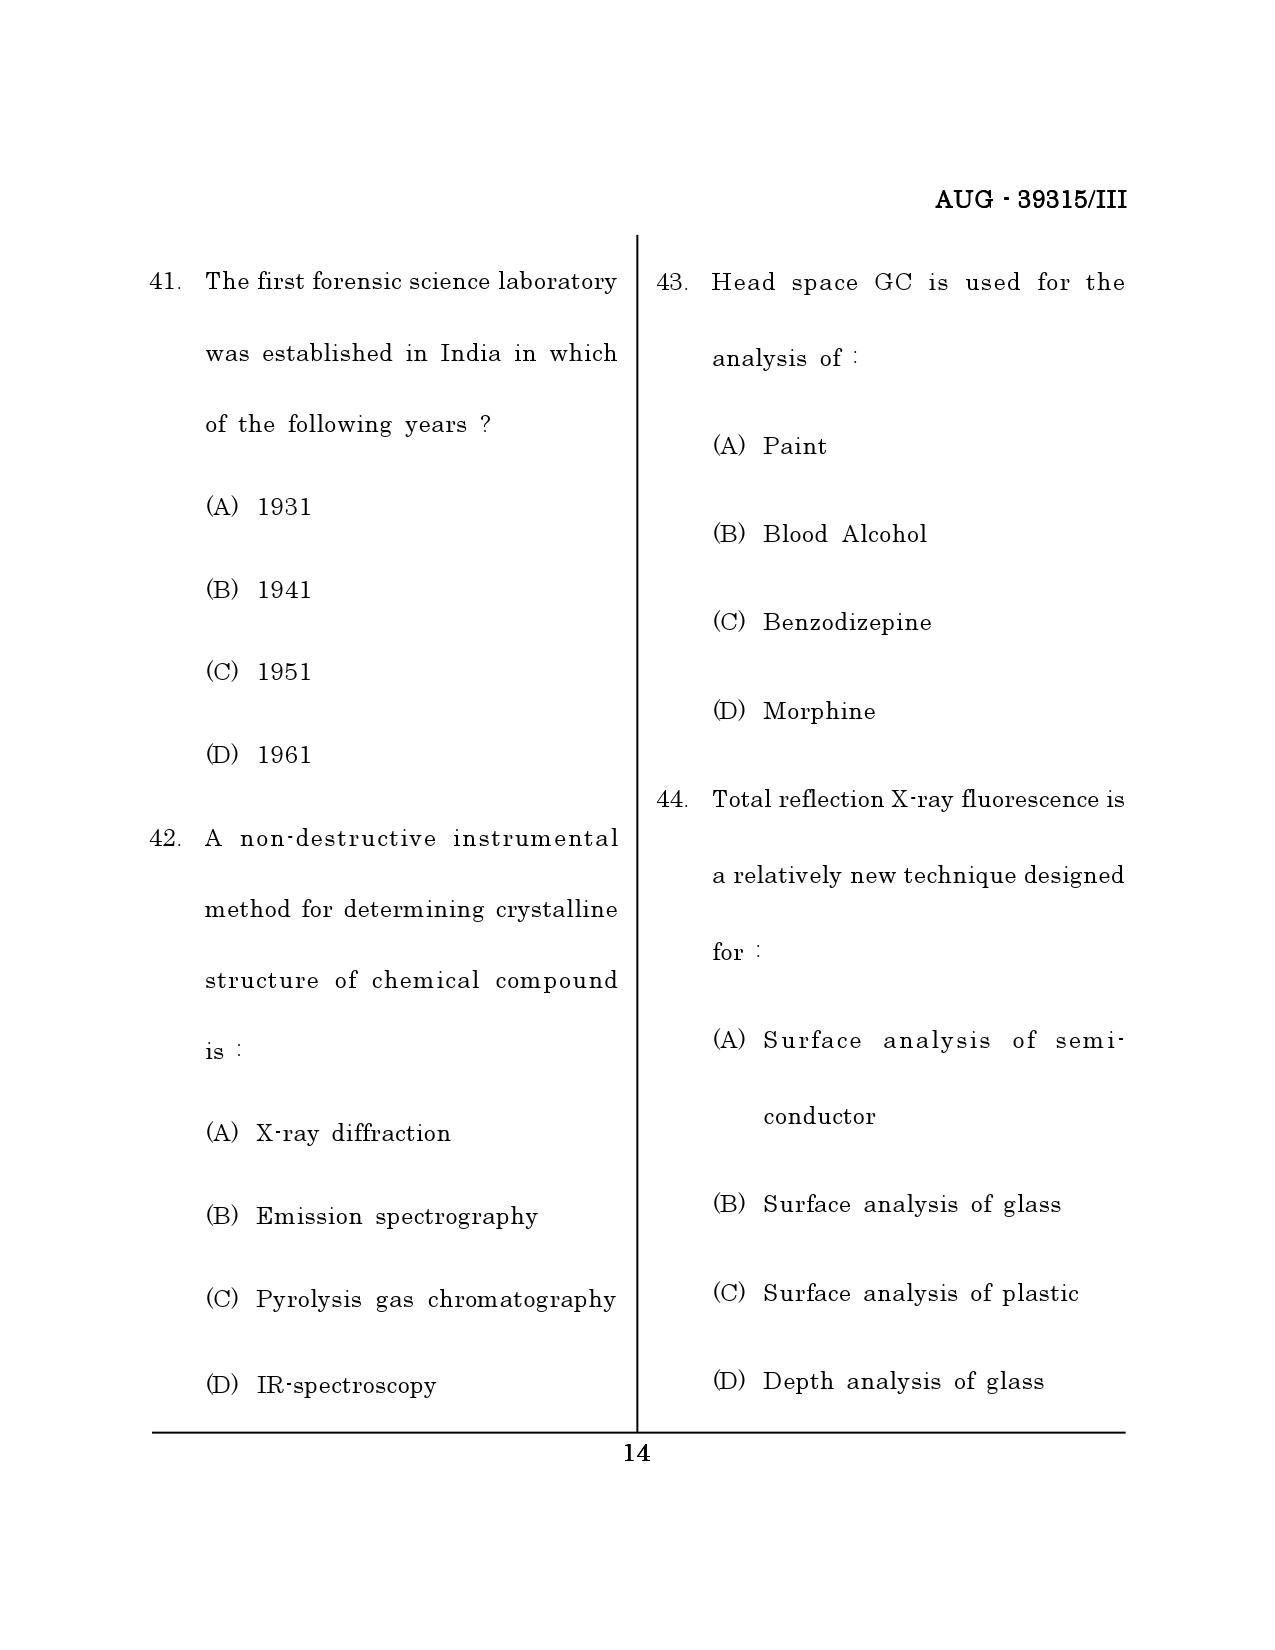 Maharashtra SET Forensic Science Question Paper III August 2015 13